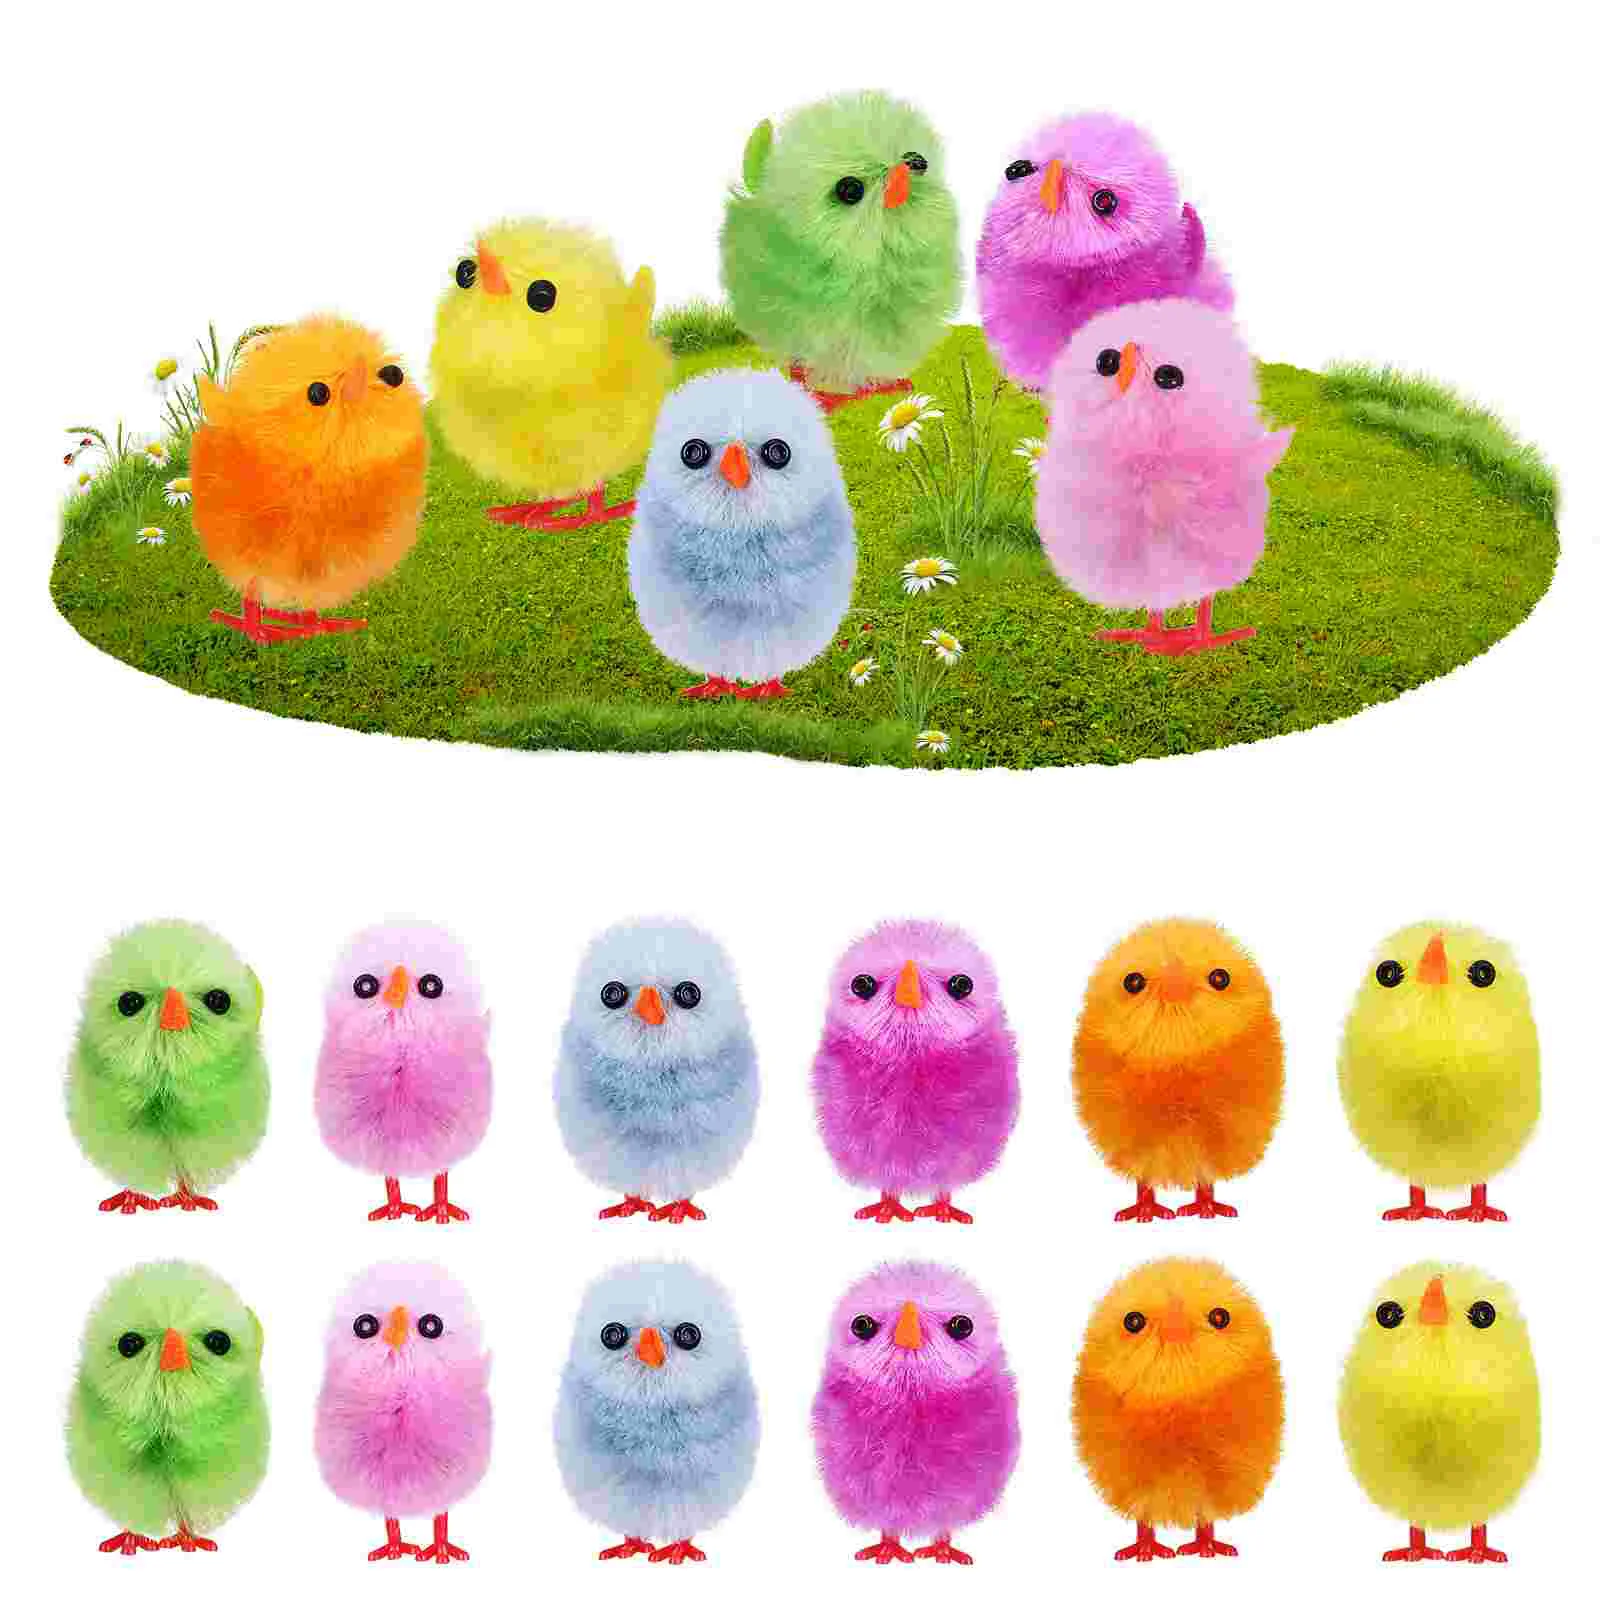 

18 Pcs Easter Chickens Fluffy Easter Chicks Fake Easter Chickens Small Chicks Baby Chickens Easter Decorations